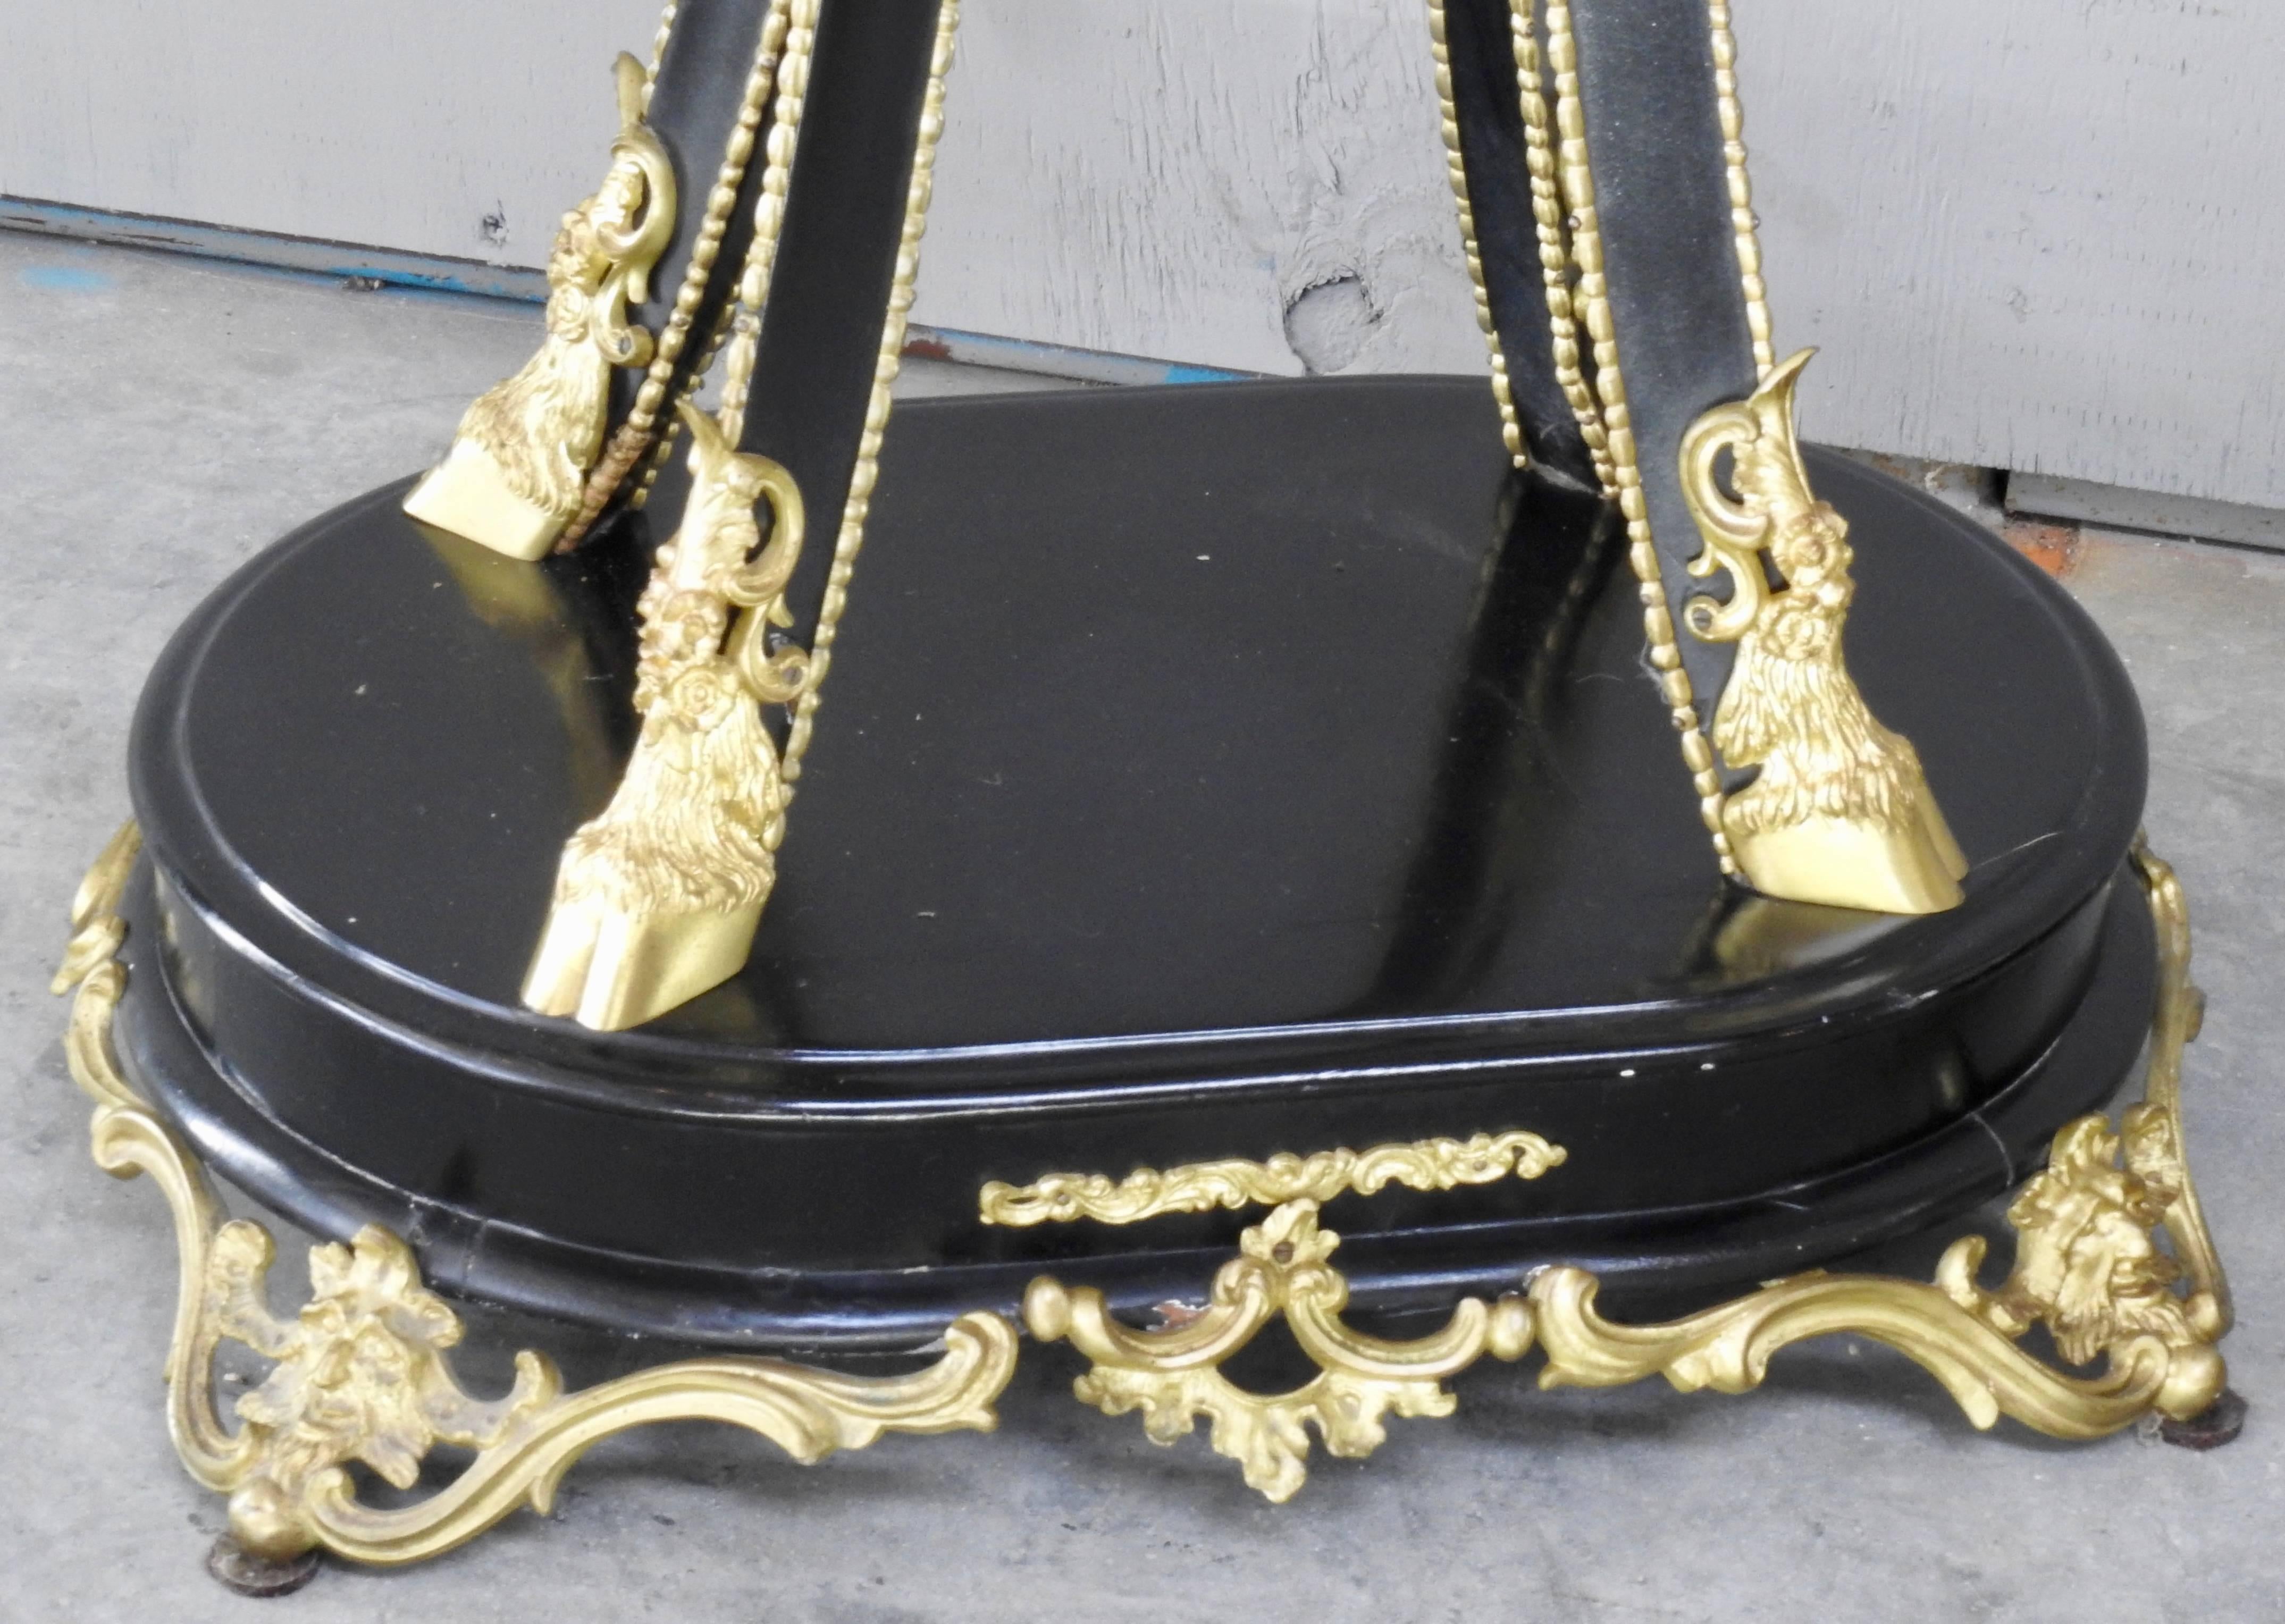 Featured are an elaborate pair of black enameled goat feet pedestals from the late 19th century. The feet are gilded bronze as well as the other ornate metal trim pieces. The goat heads appear near the top of the pedestal. The black enamel was